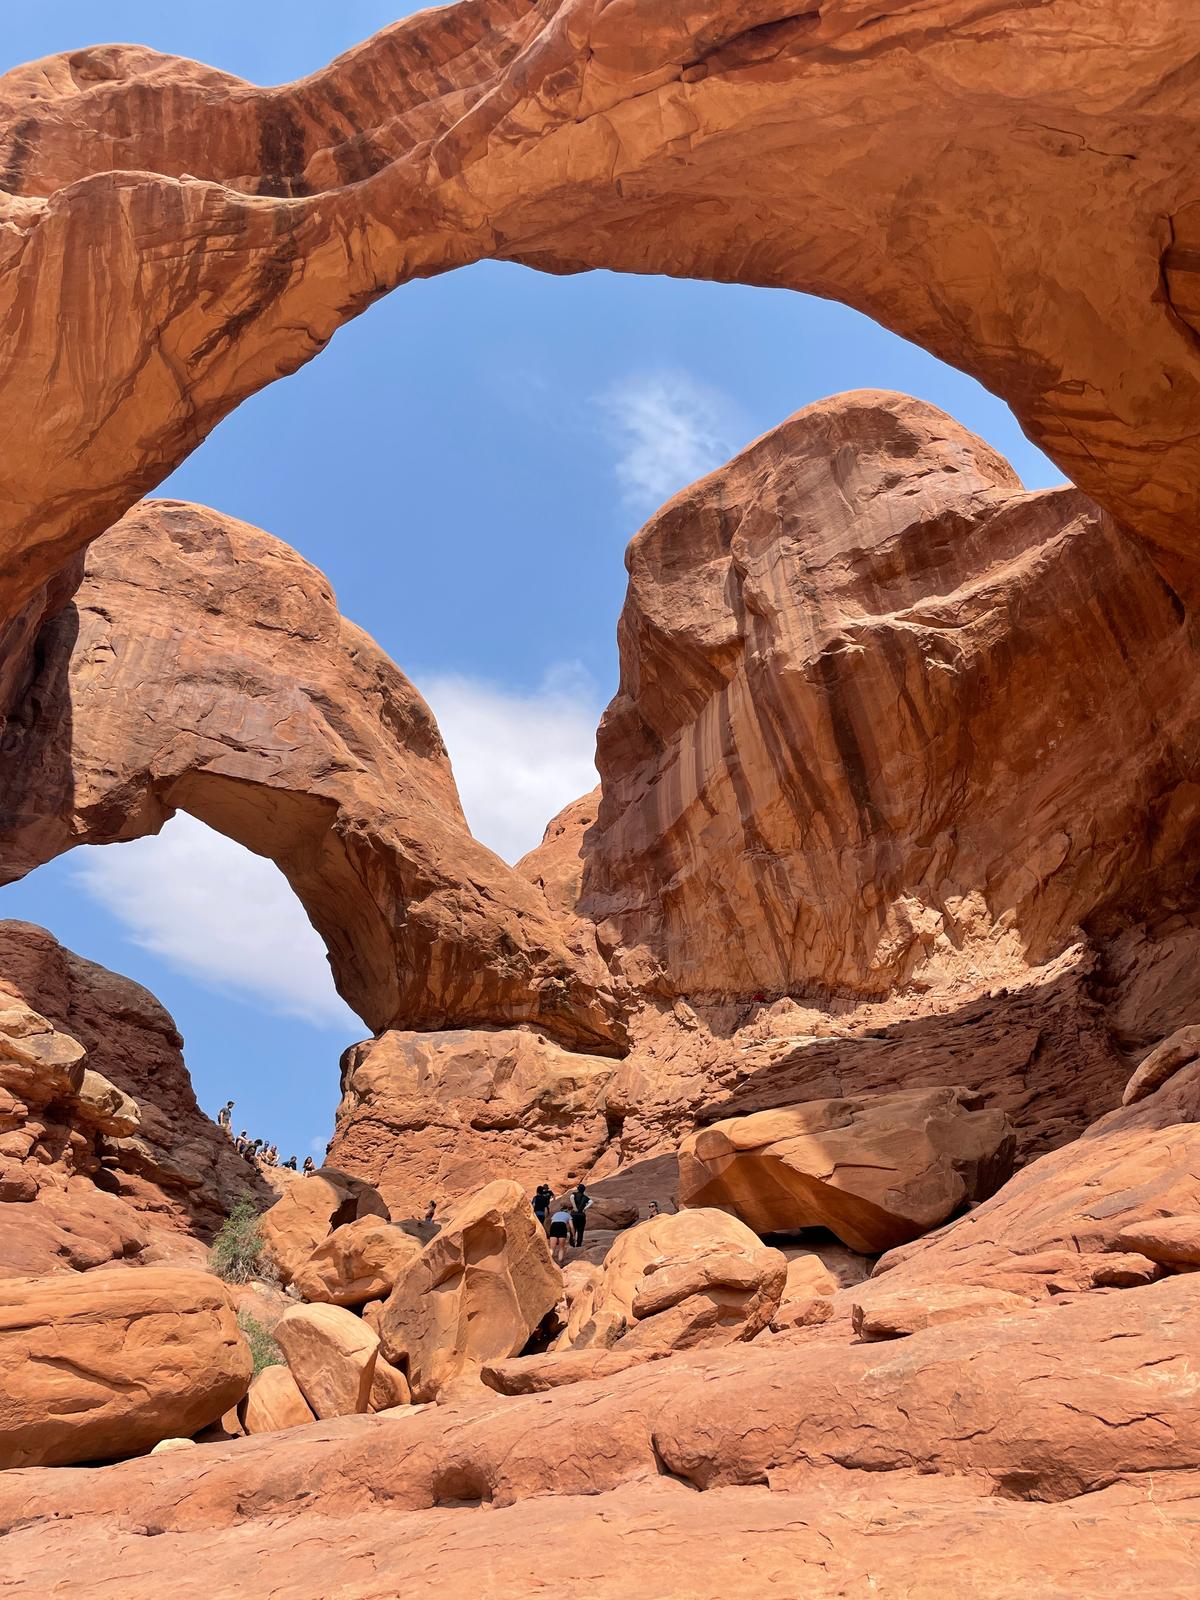 Arches National Park is home to more than 2,000 documented arches. (Janna Graber)